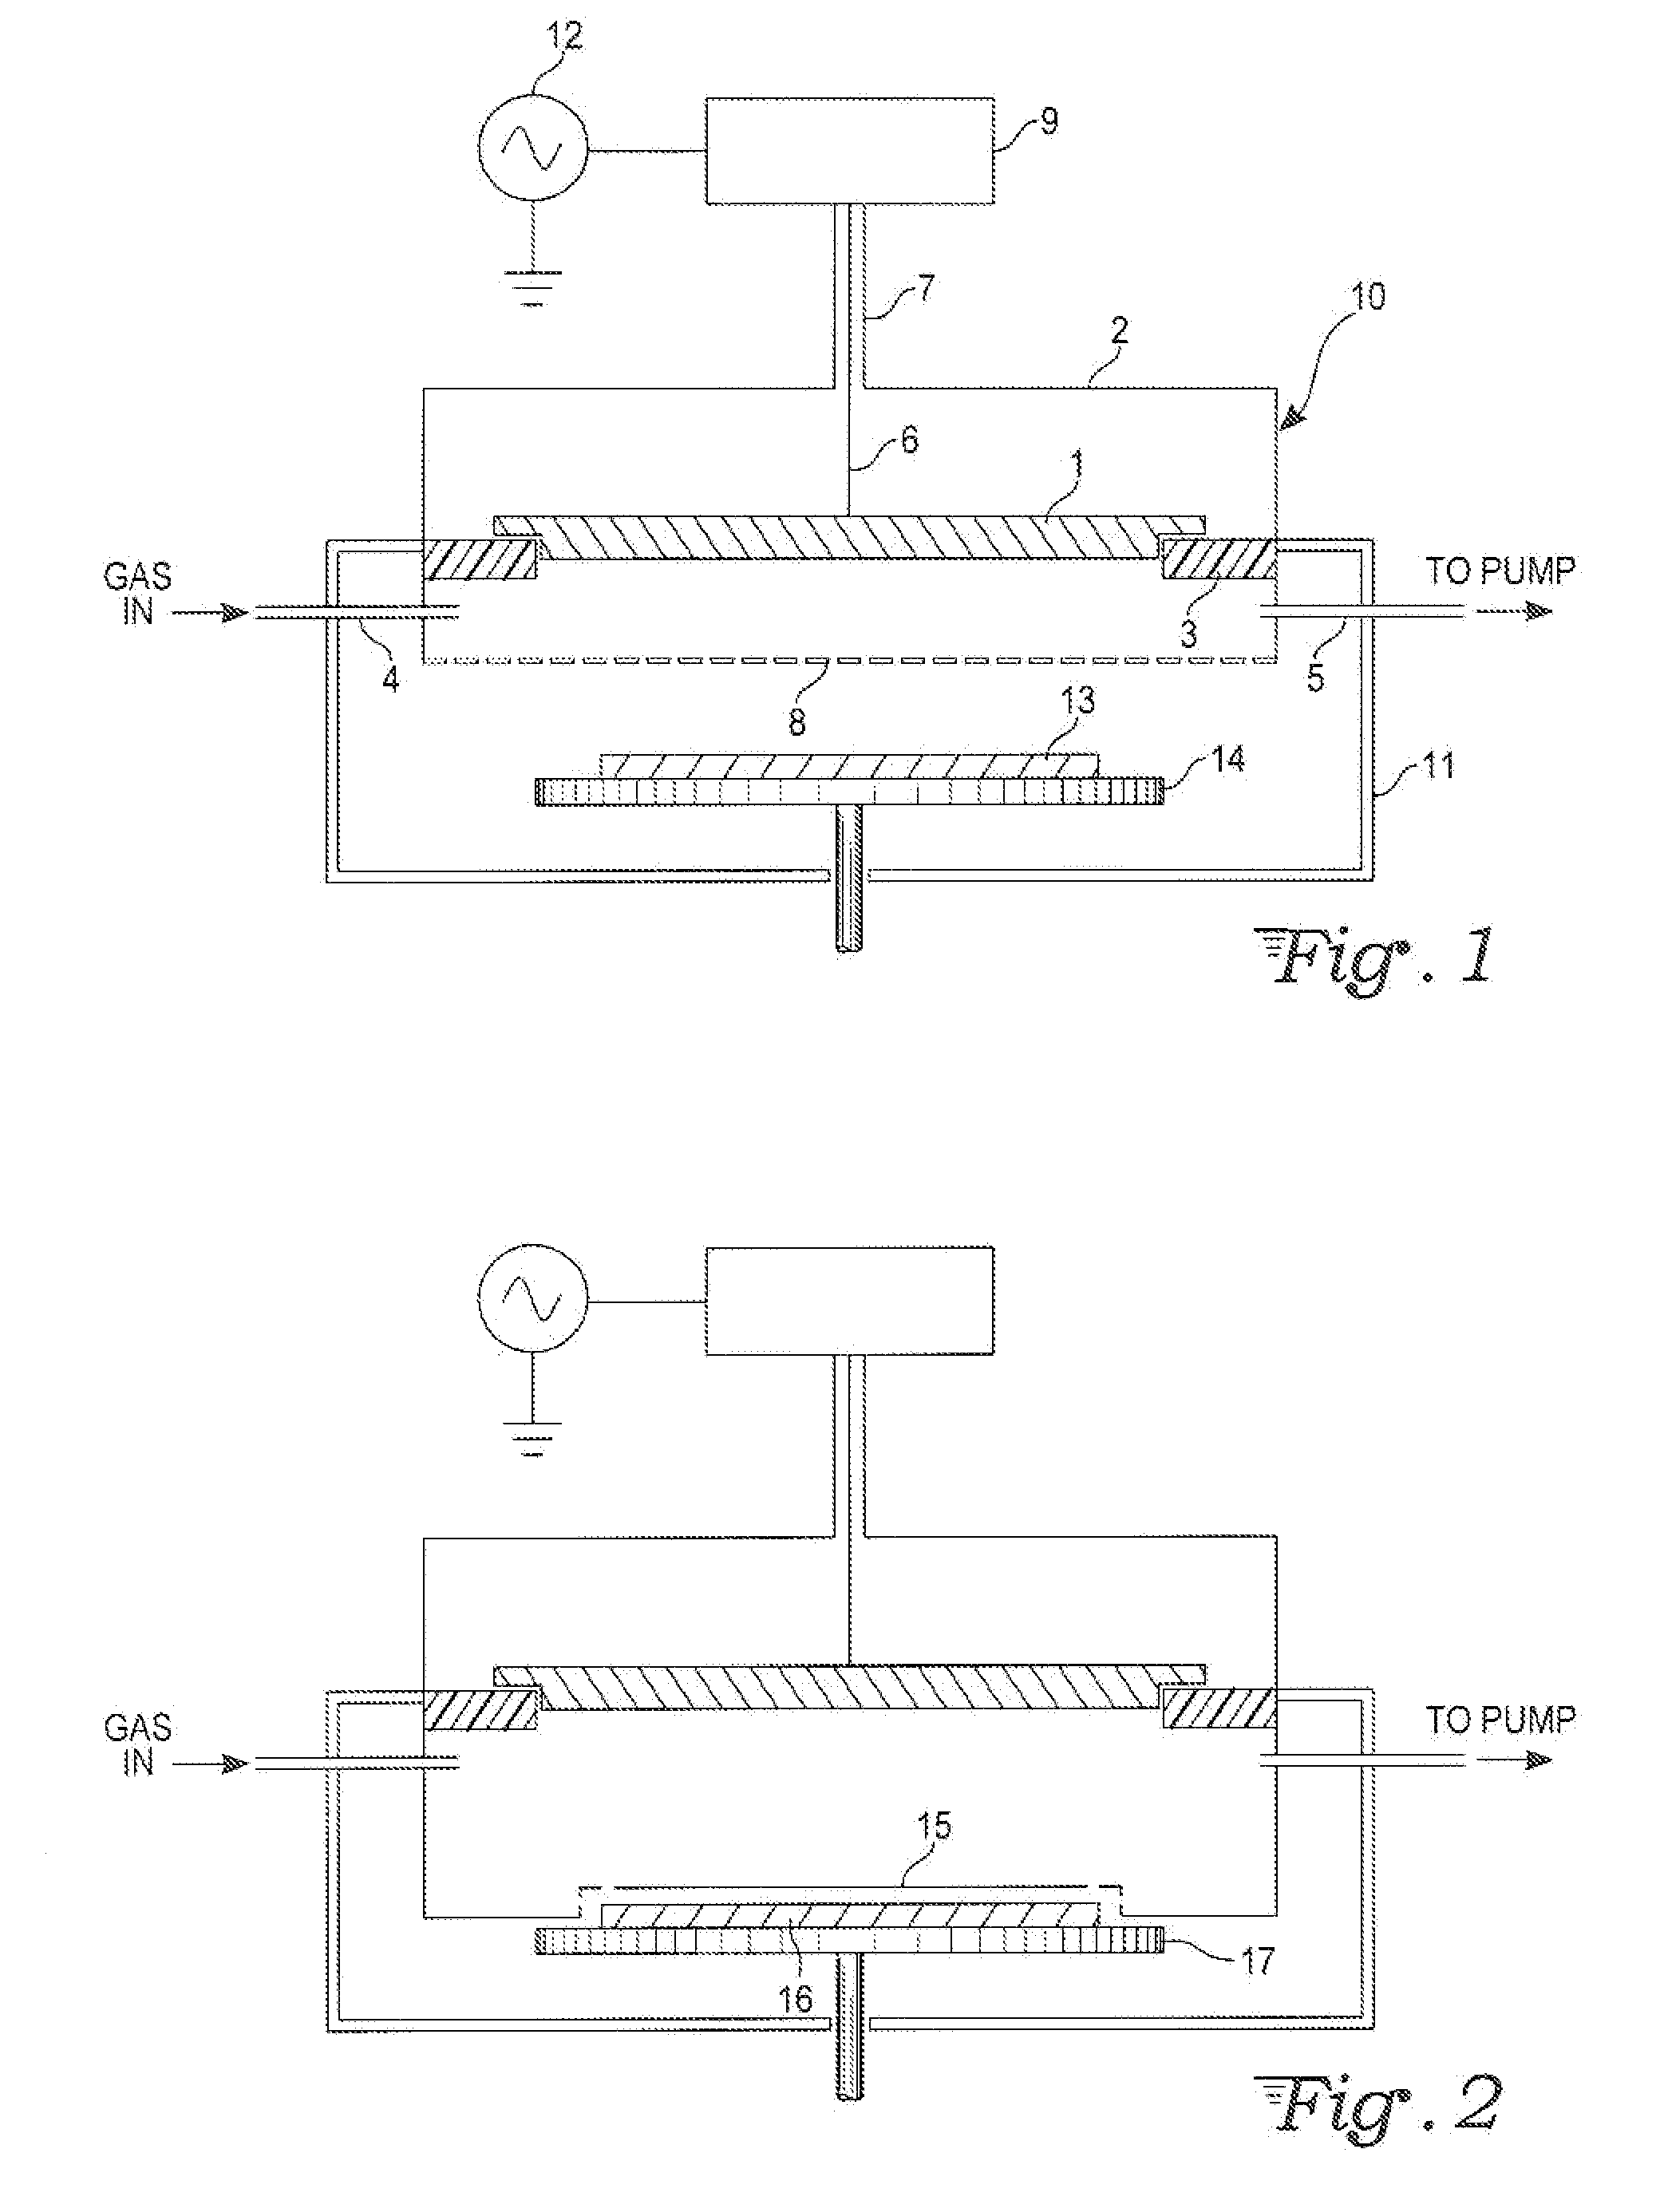 Capacitively coupled remote plasma source with large operating pressure range